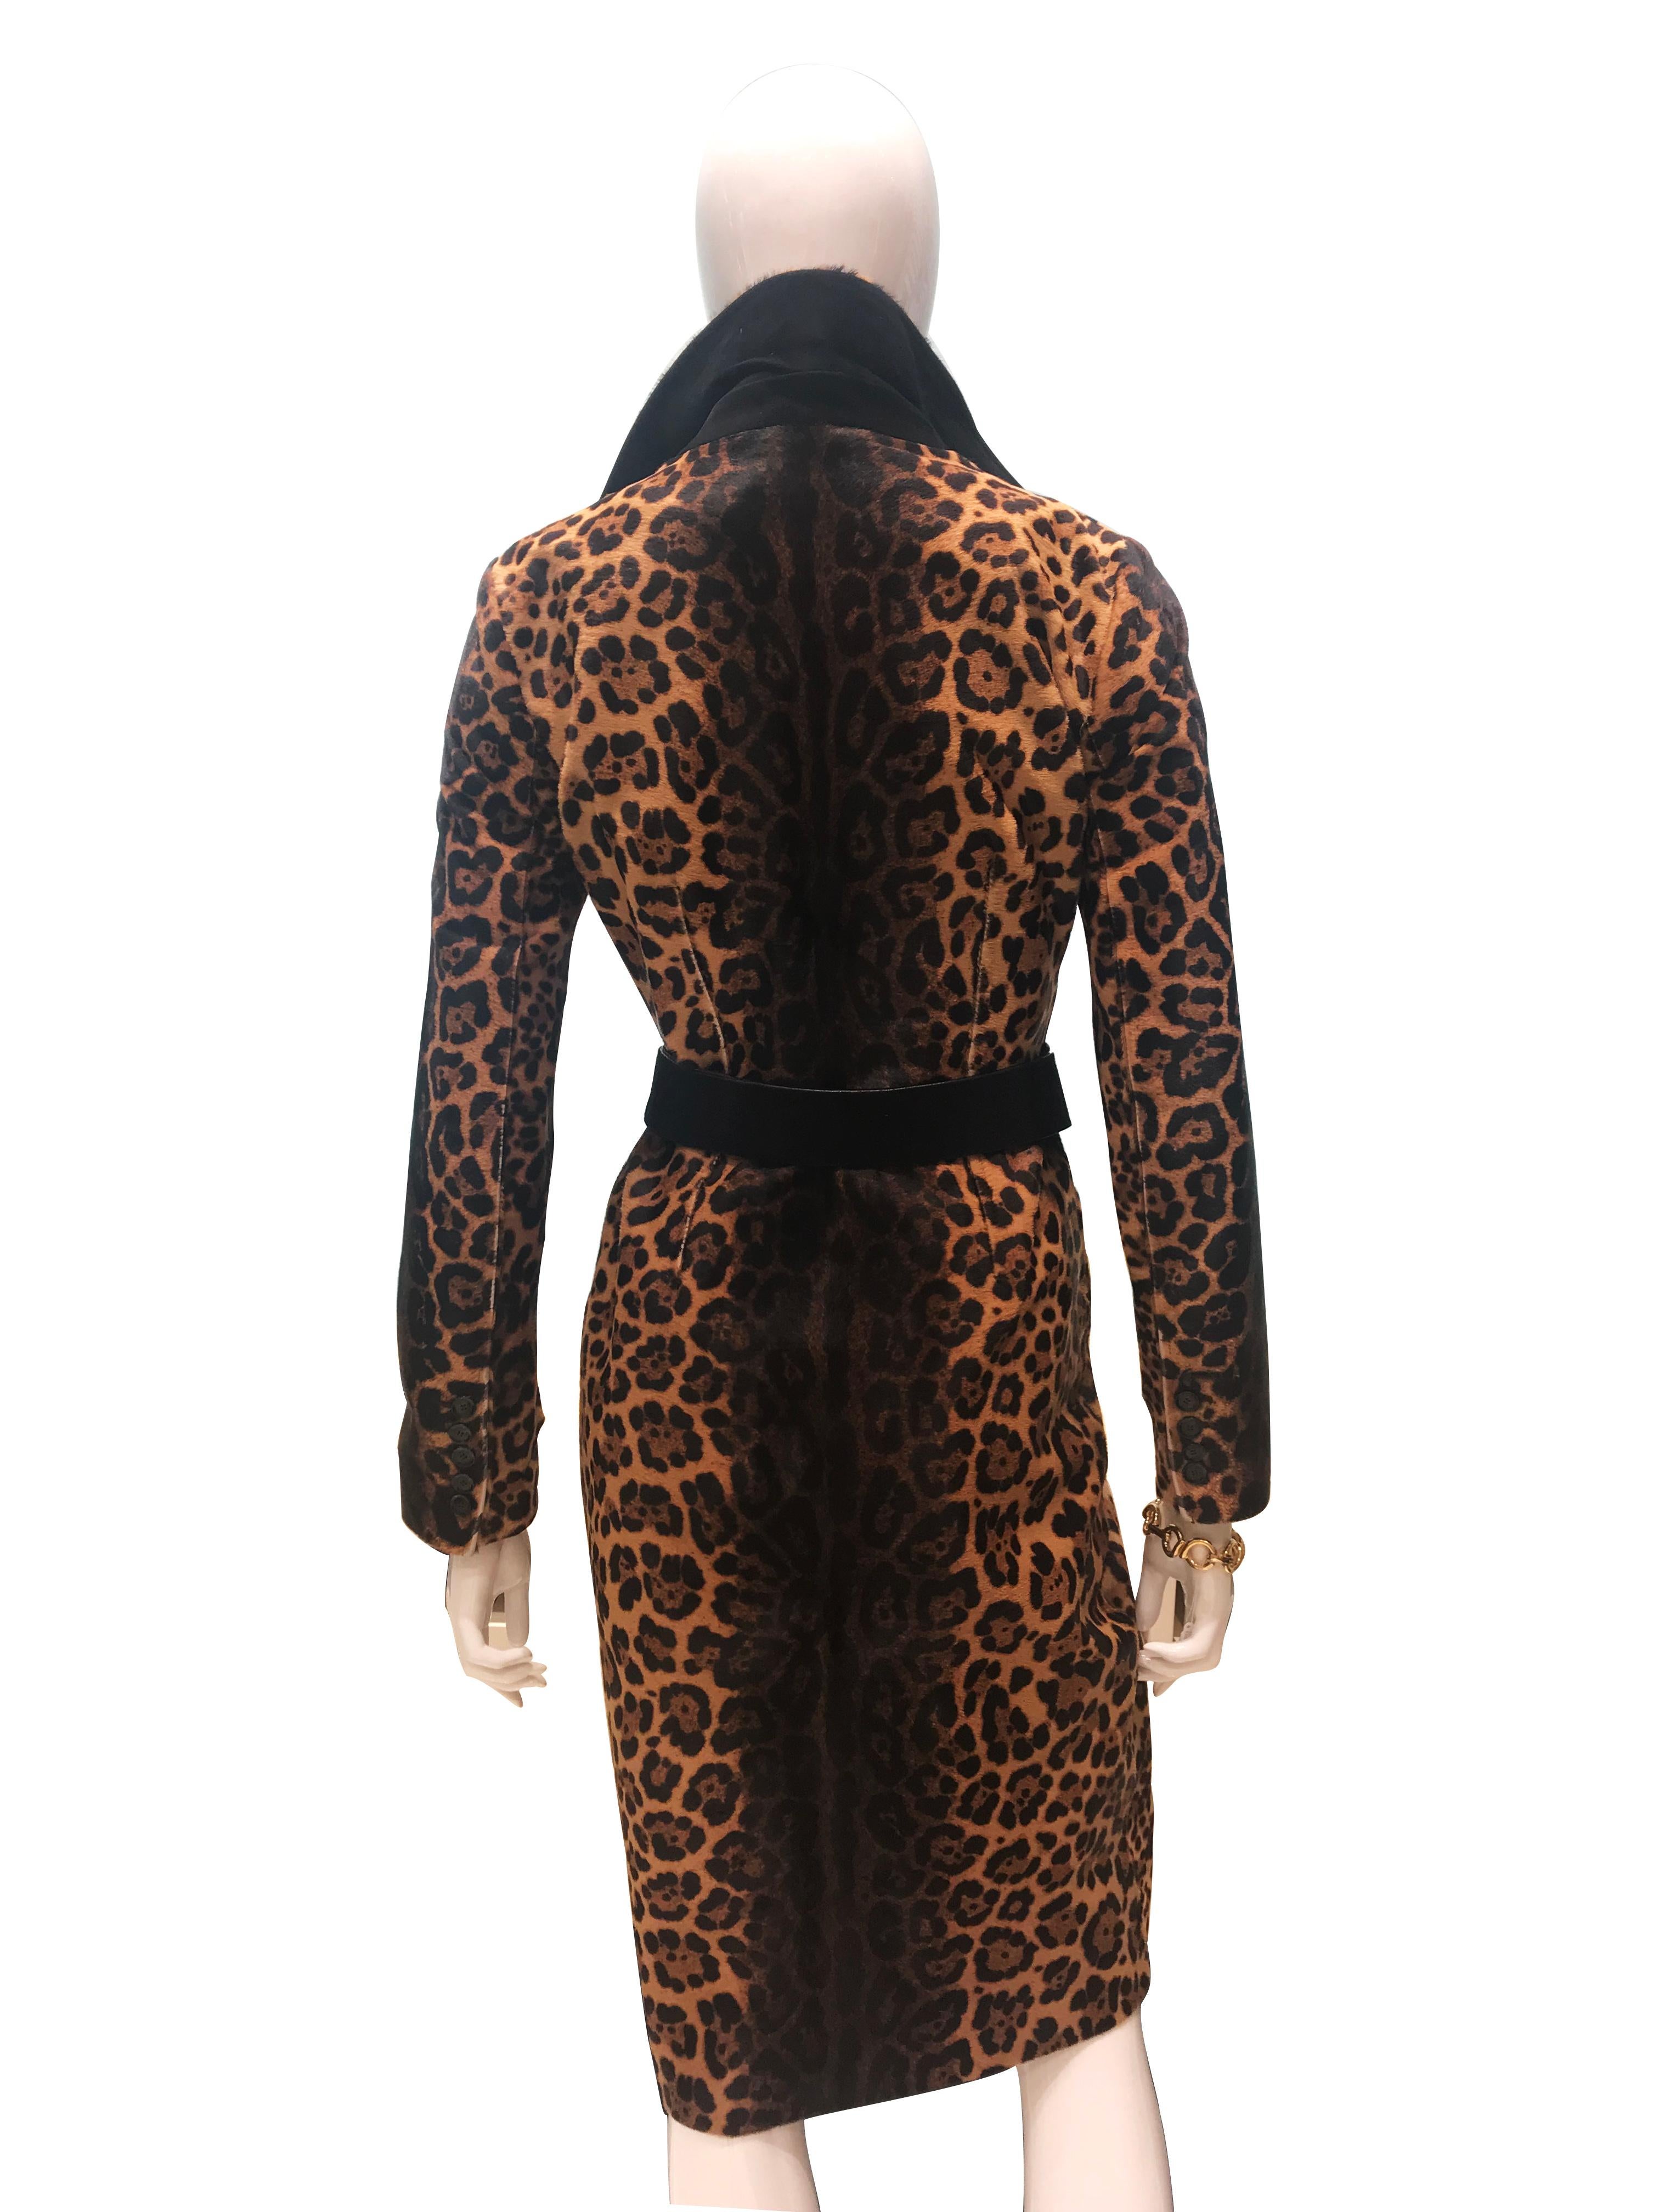 Gucci by Frida Giannini Pre-Fall 2013 Collection Coat look #6. 
Done in leopard printed calf fur with a black suede belt. The coat is fully lined.
In very good condition with light wear along front edges - please see photograph 5.

Size: